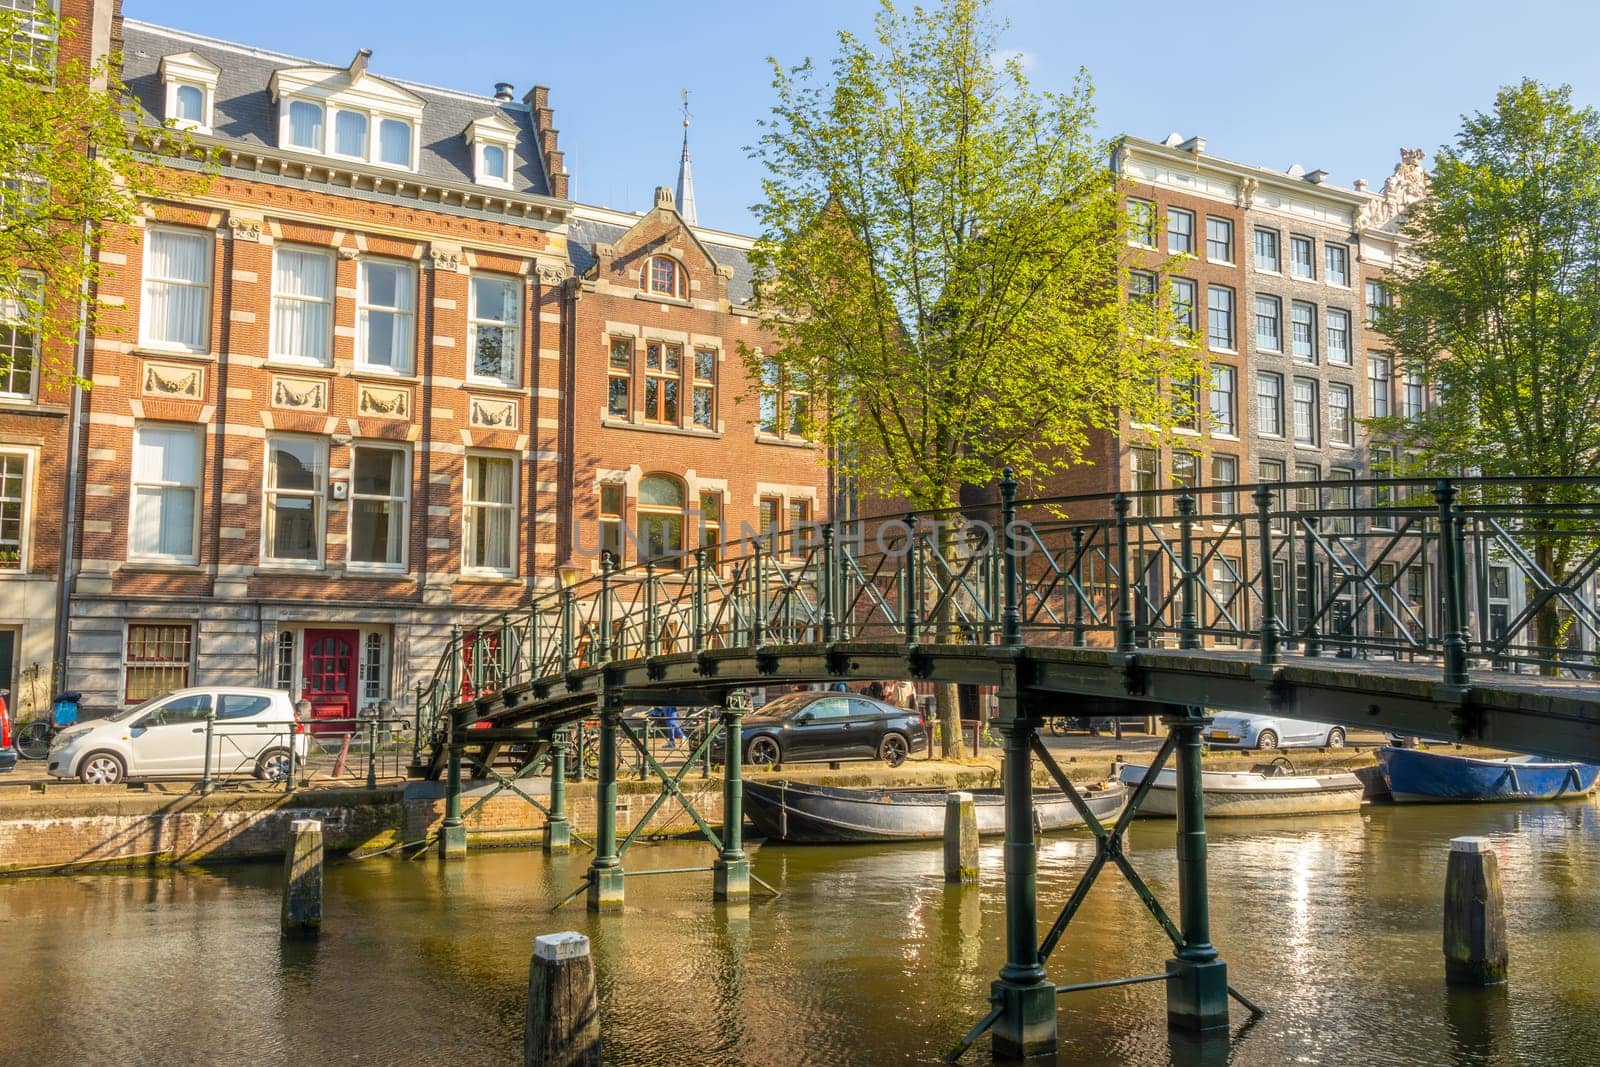 Old Footbridge Over a Canal in Amsterdam by Ruckzack